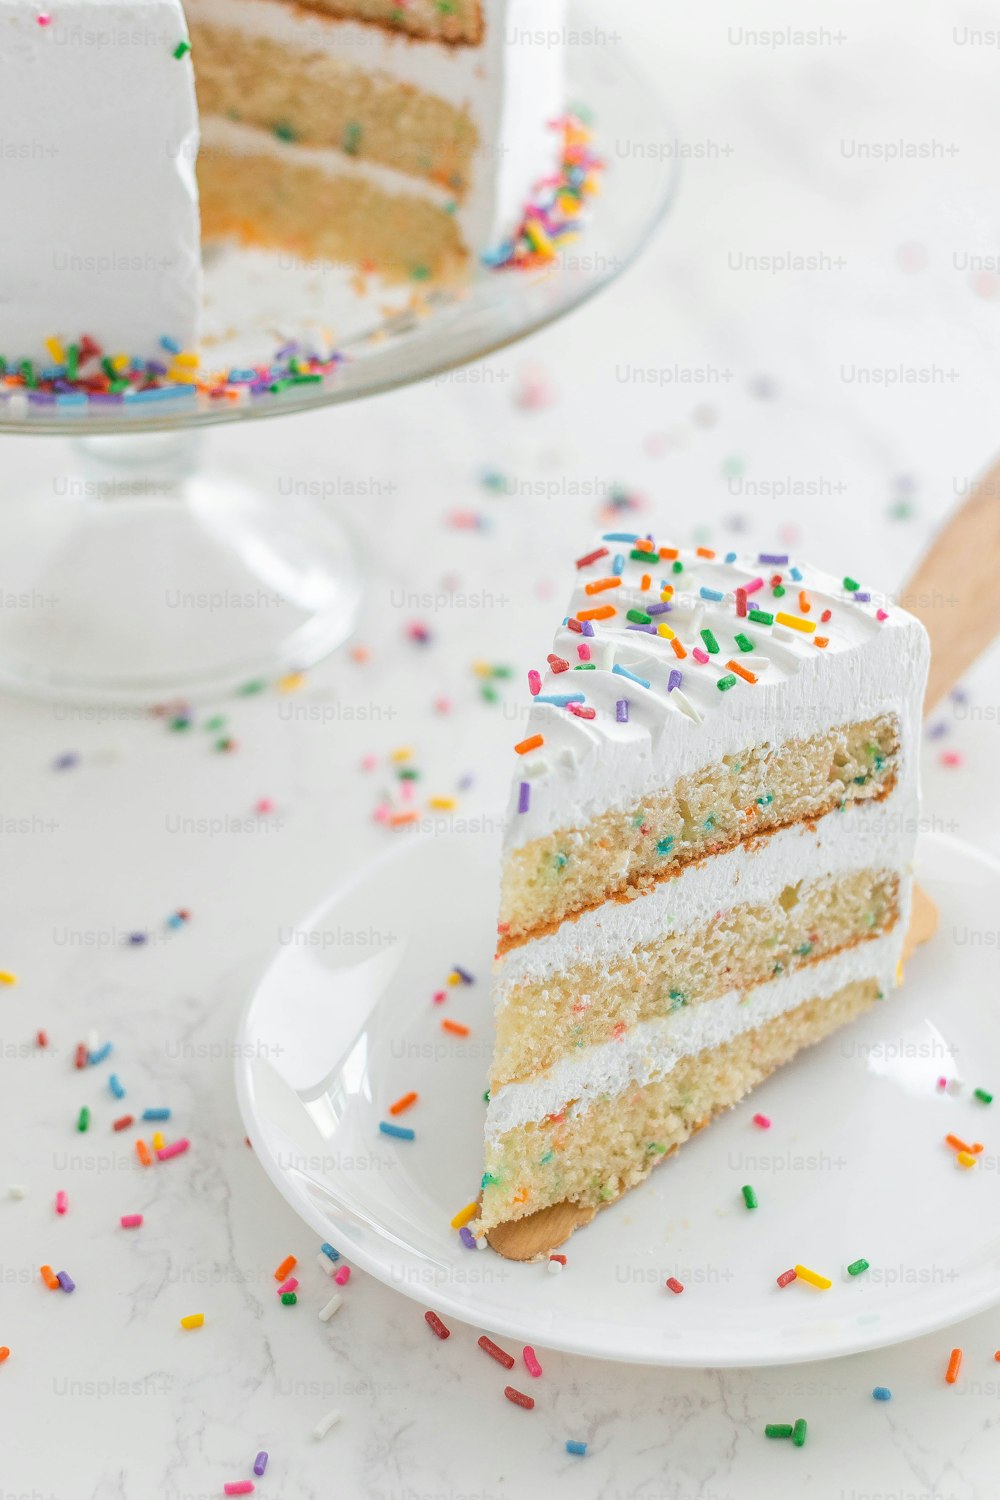 a slice of cake on a plate with sprinkles